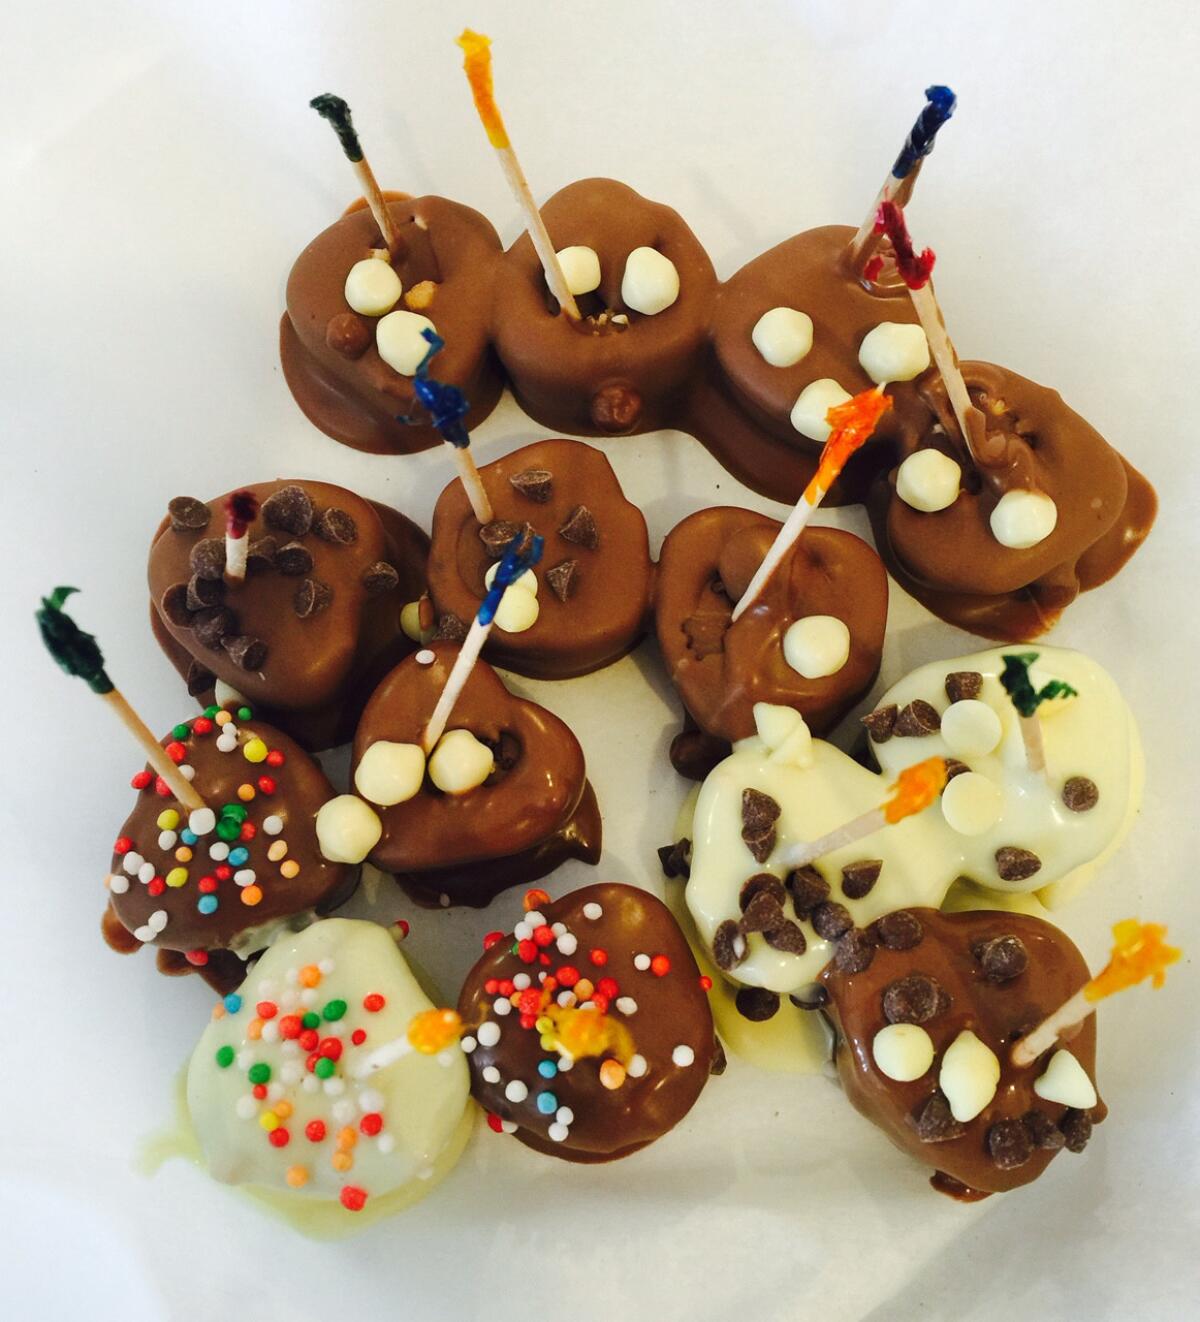 My attempt to make truffles, all of which were later devoured. (Julie L. Kessler)